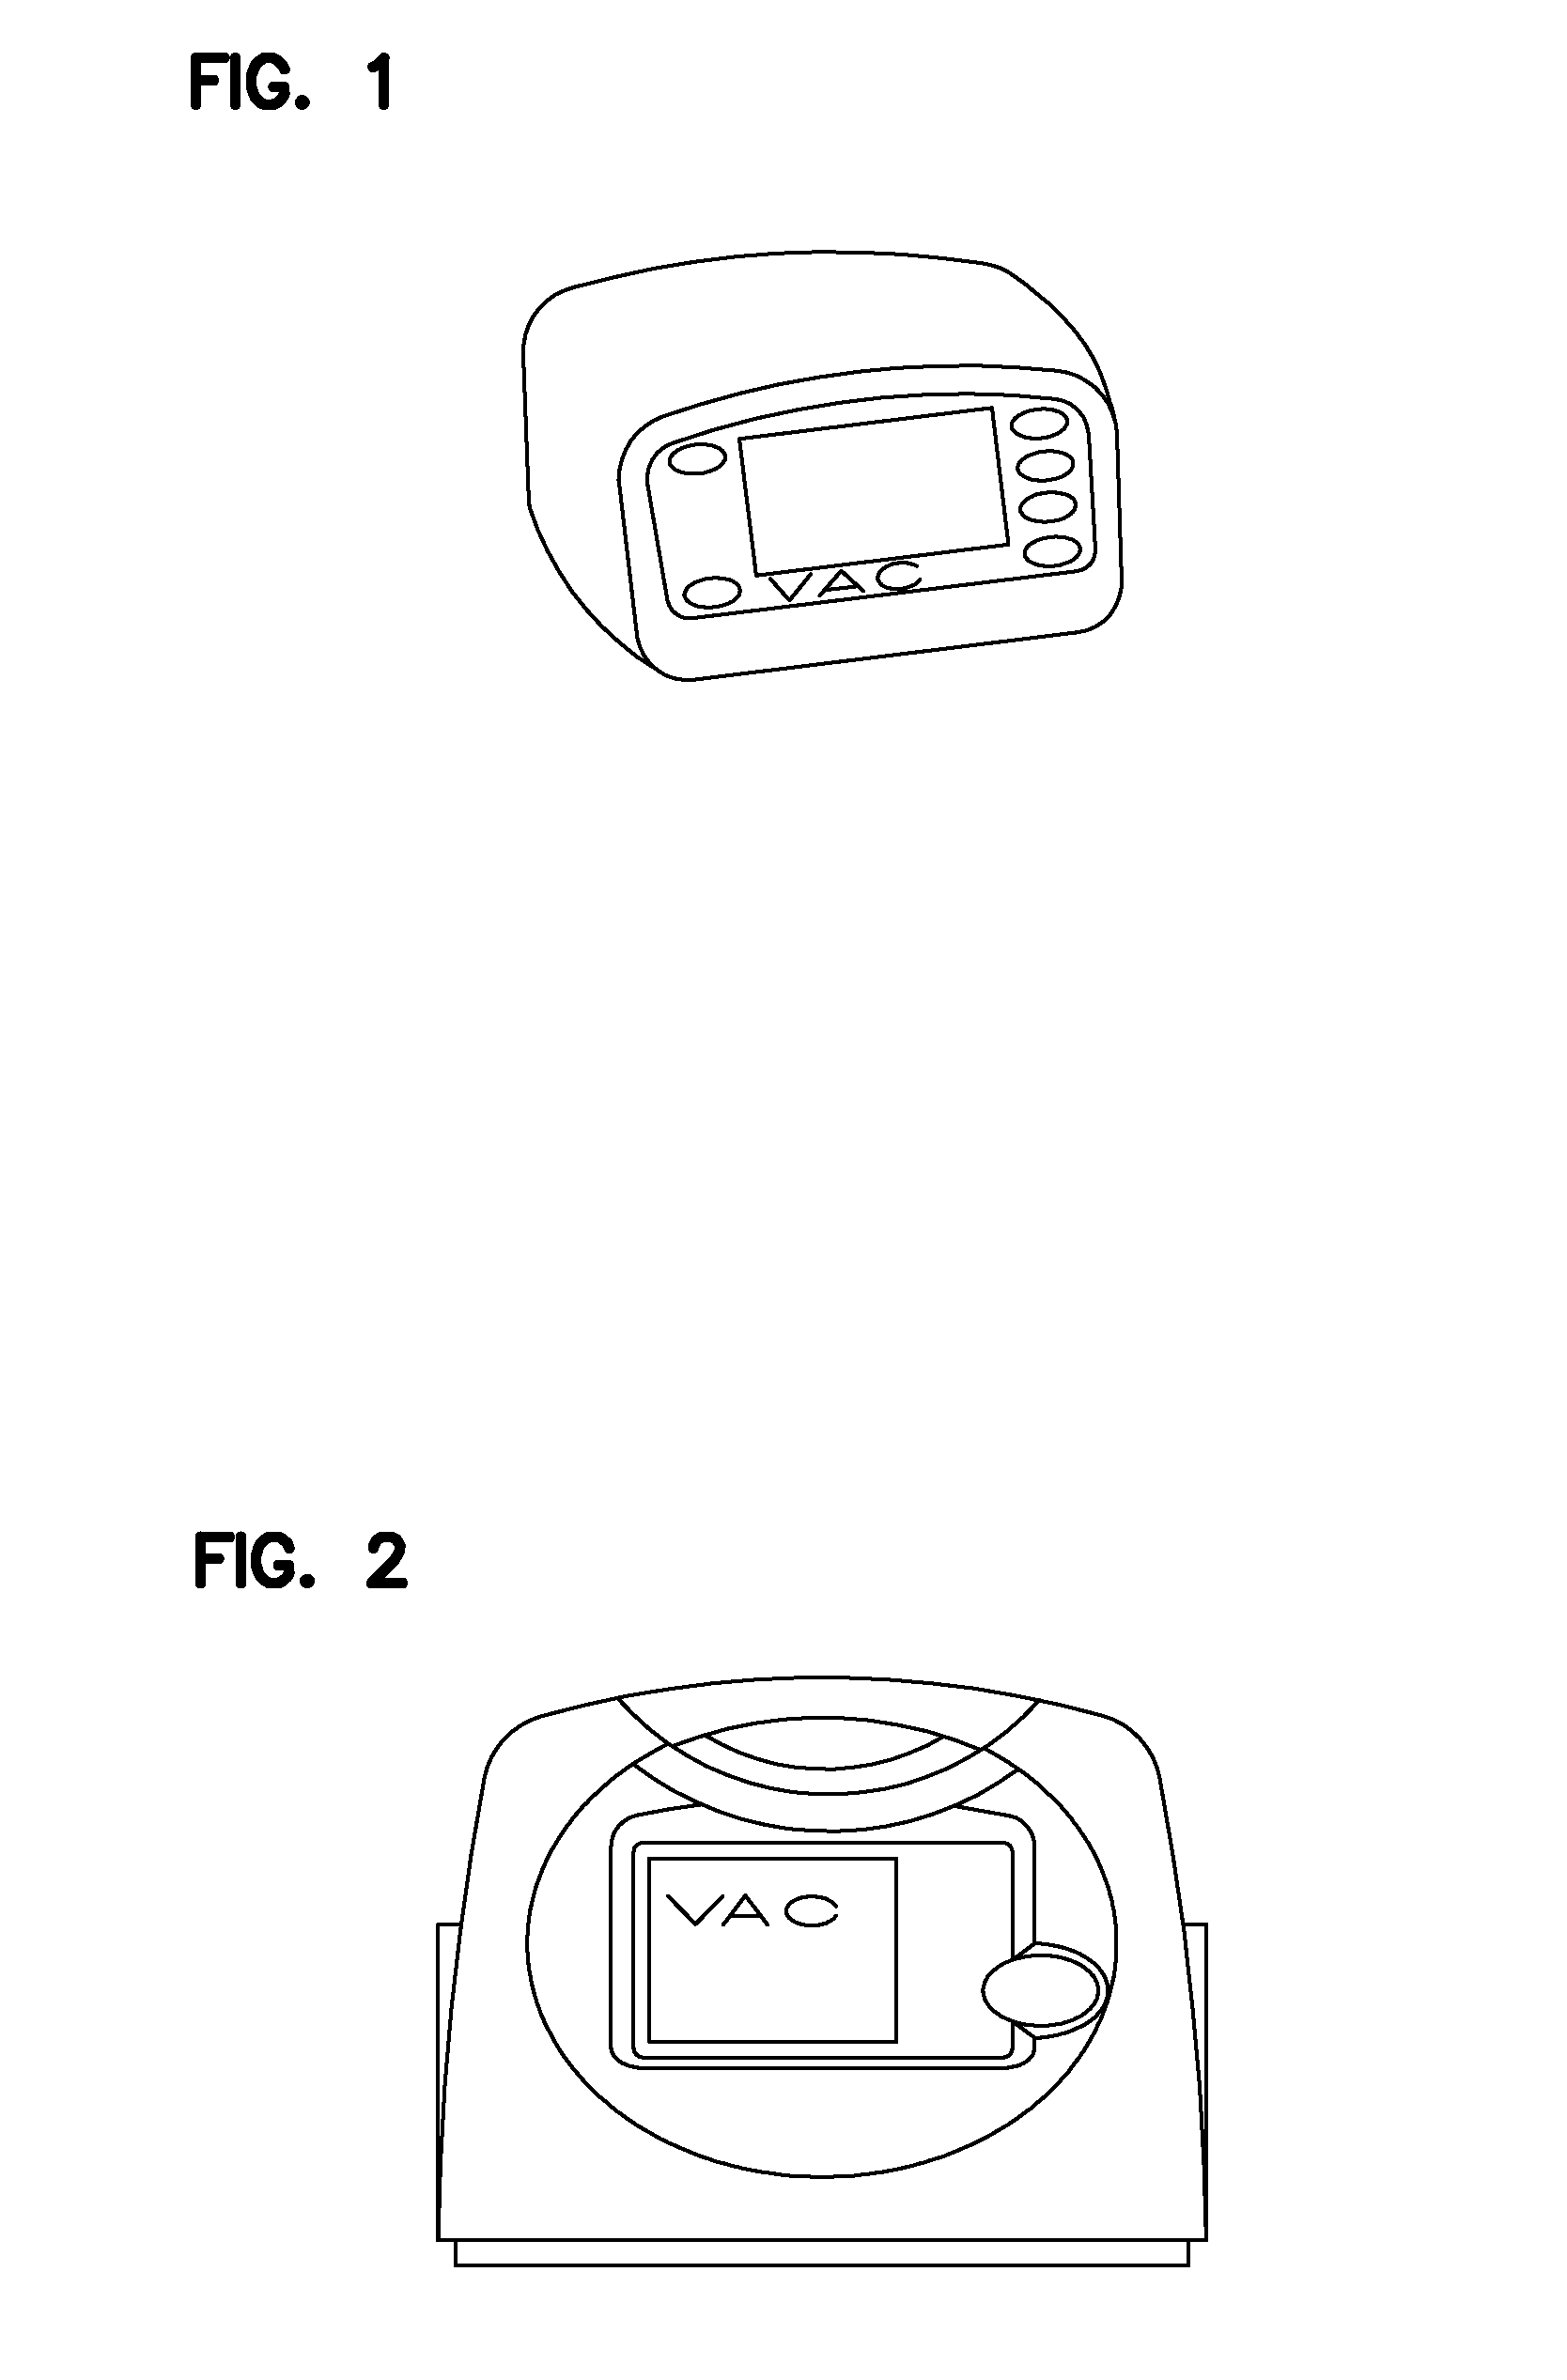 Negative pressure wound treatment device, and methods